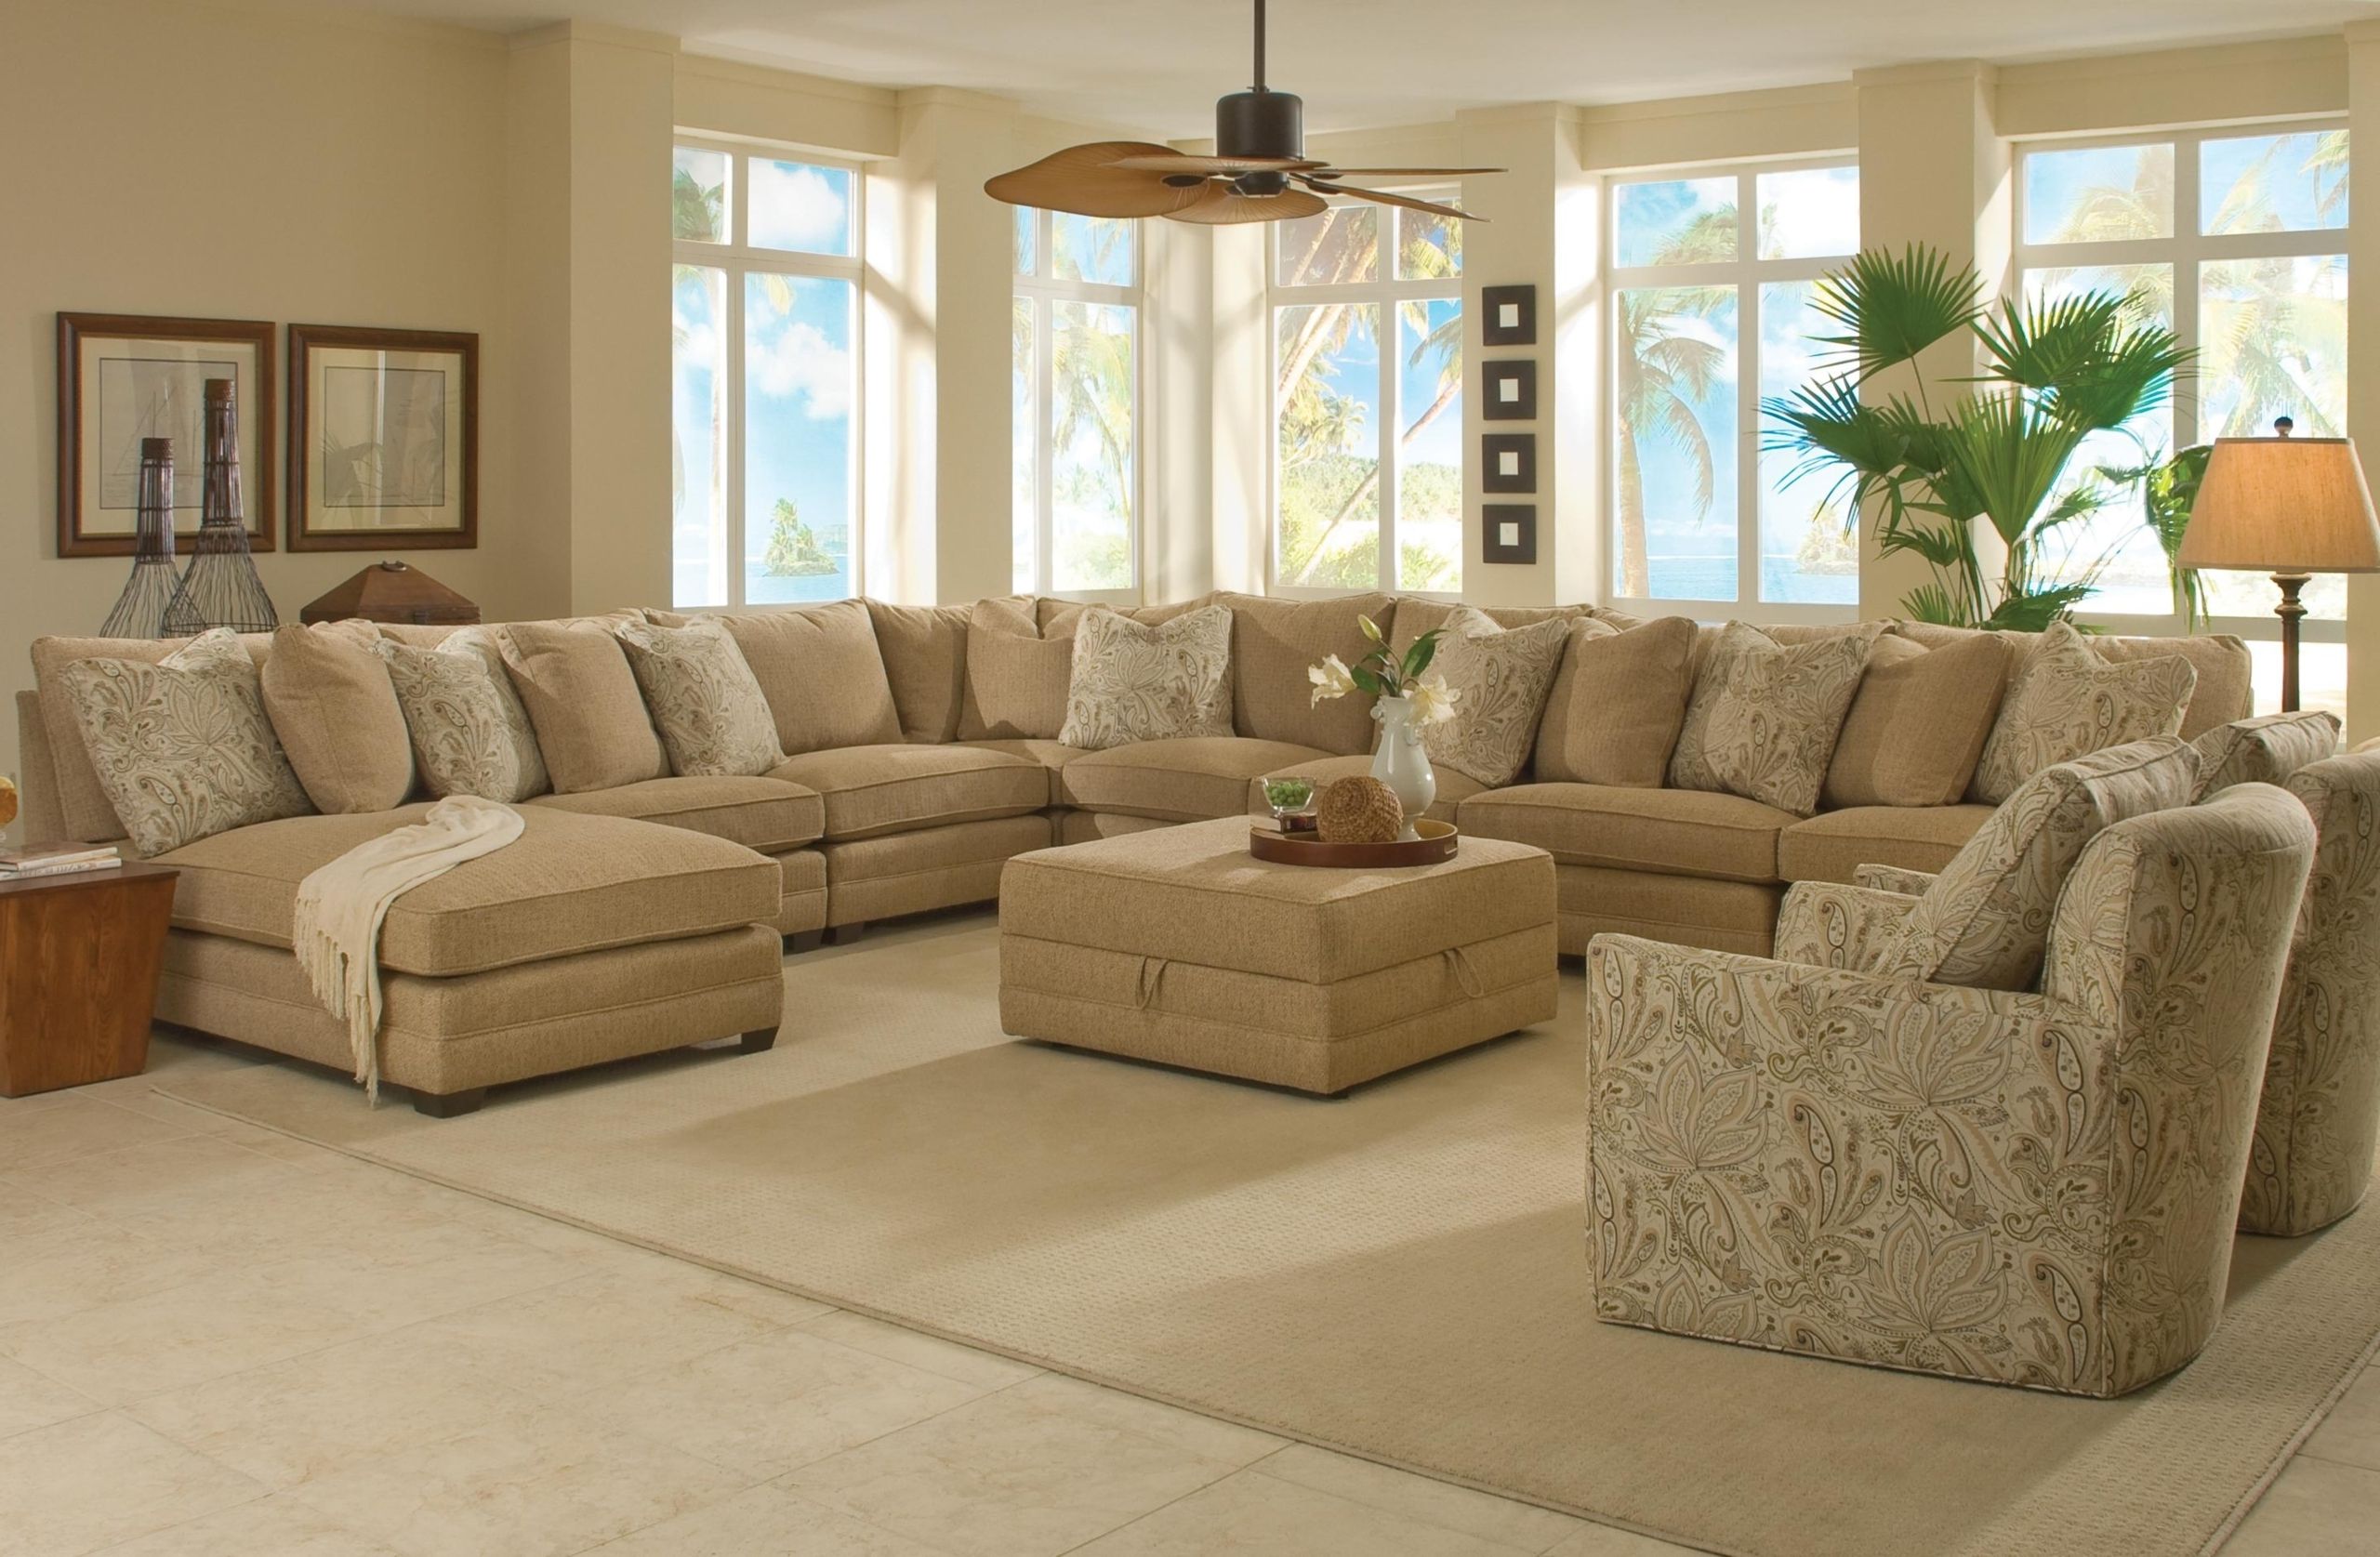 Ella Home Ideas: Plush Extra Large Sectional Sofa : Best And Most Intended For Preferred 110" Oversized Sofas (View 10 of 15)